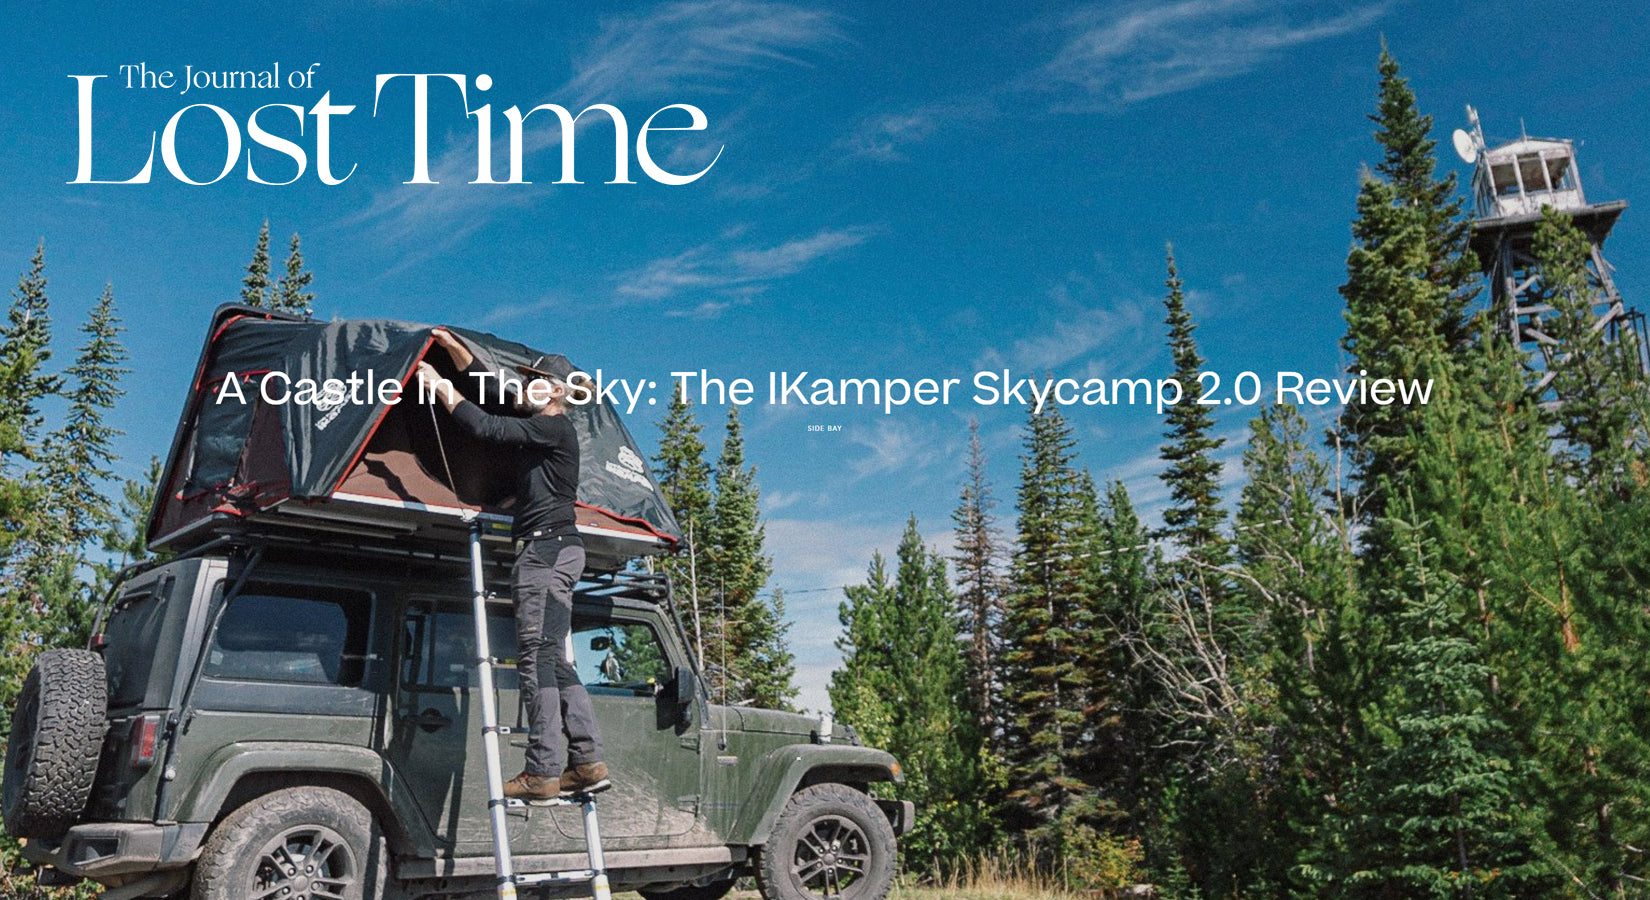 A Castle In The Sky: The IKamper Skycamp 2.0 Review - @TheJournalofLostTime